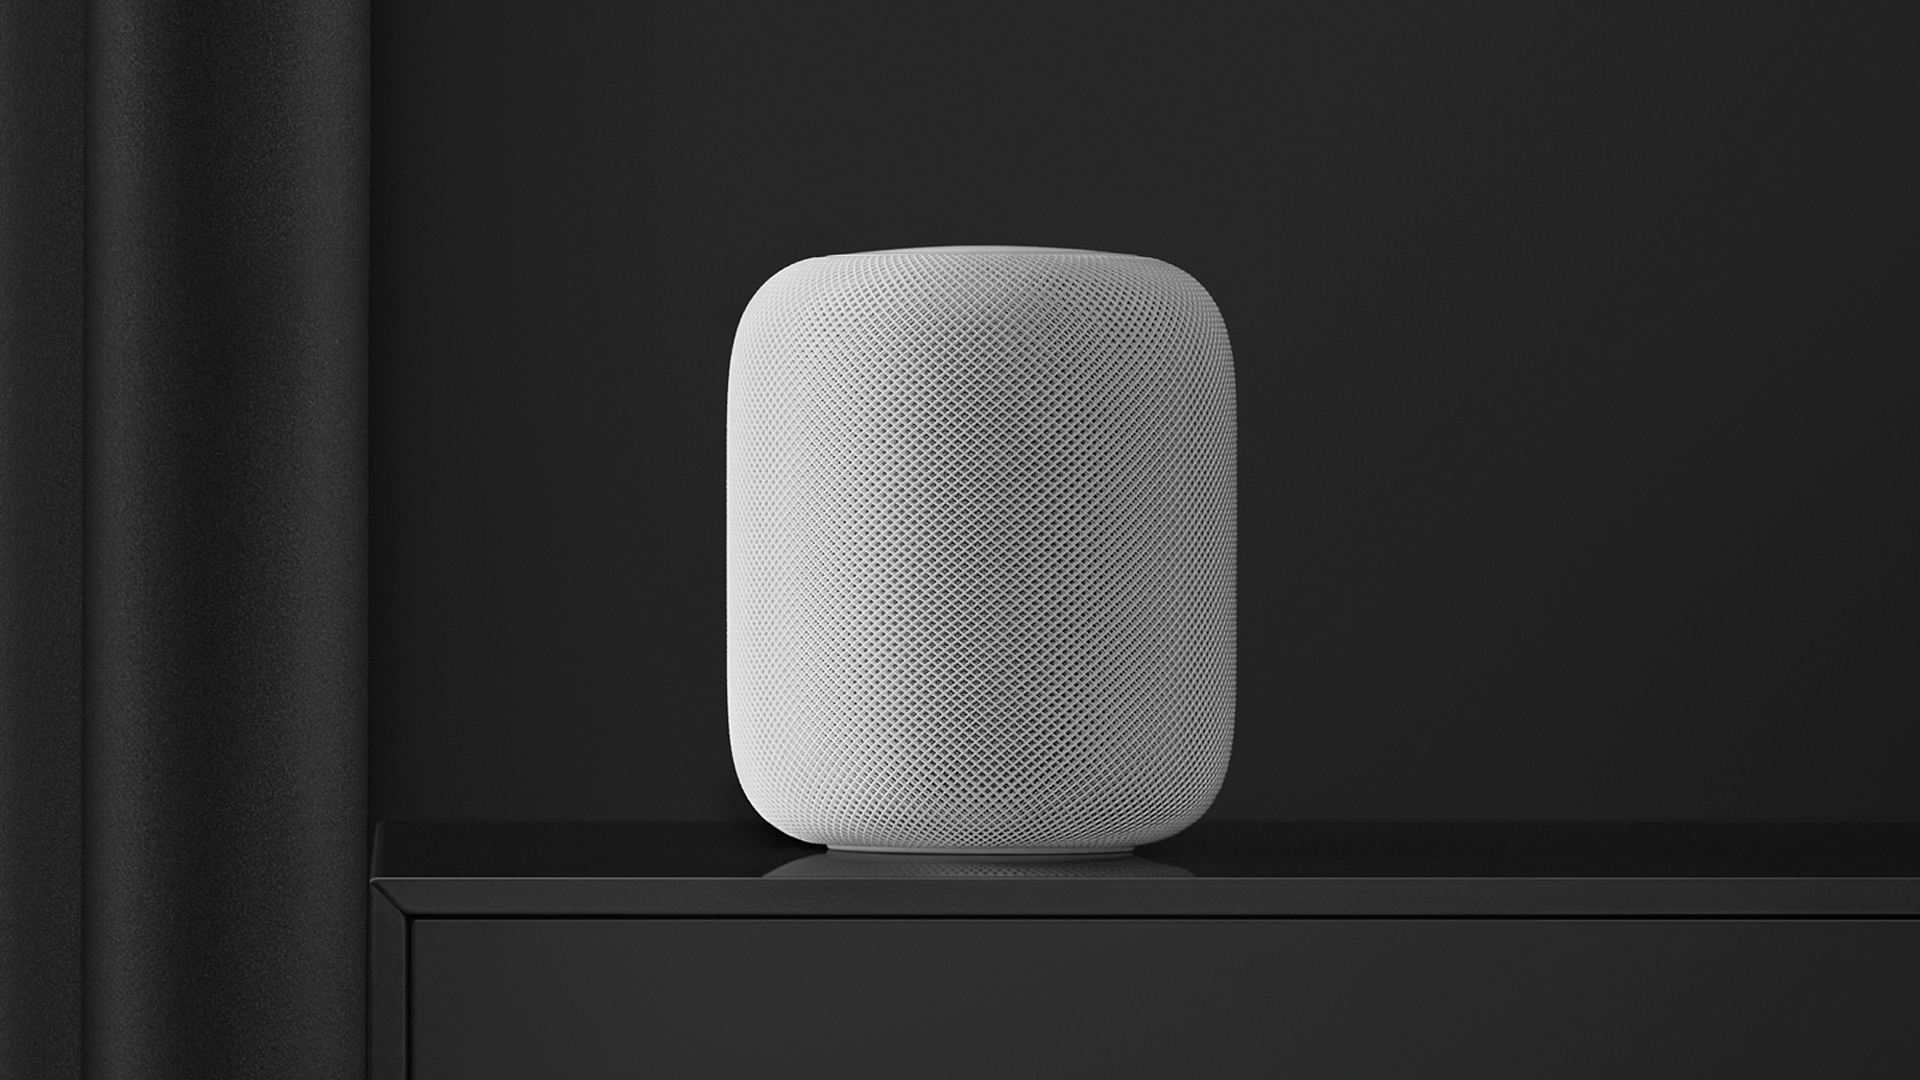 A white 2018 HomePod in a black room